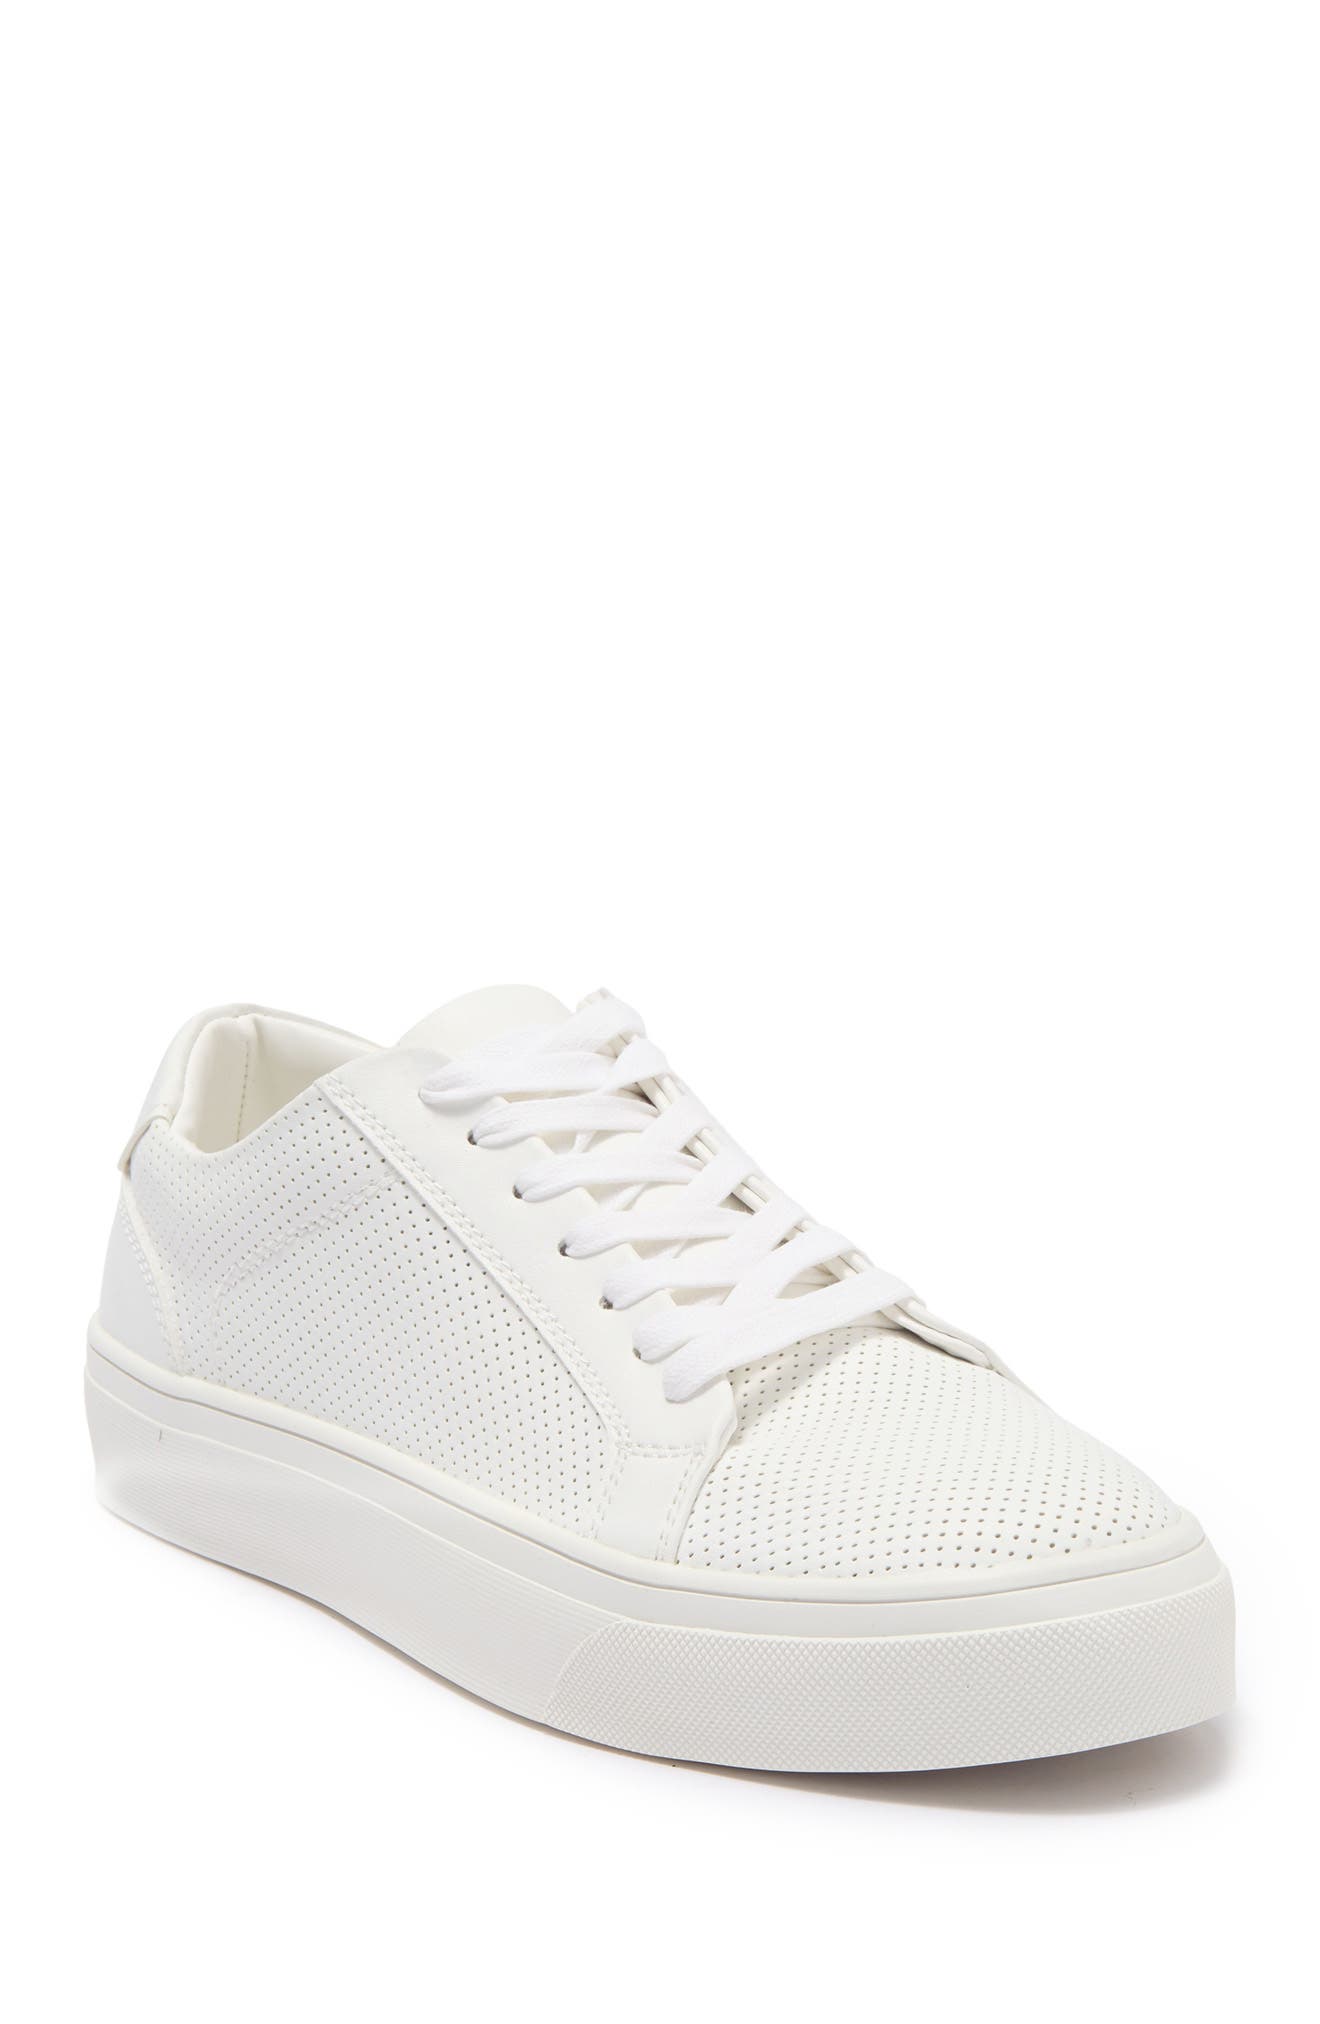 Abound Baxter Perforated Sneaker In White